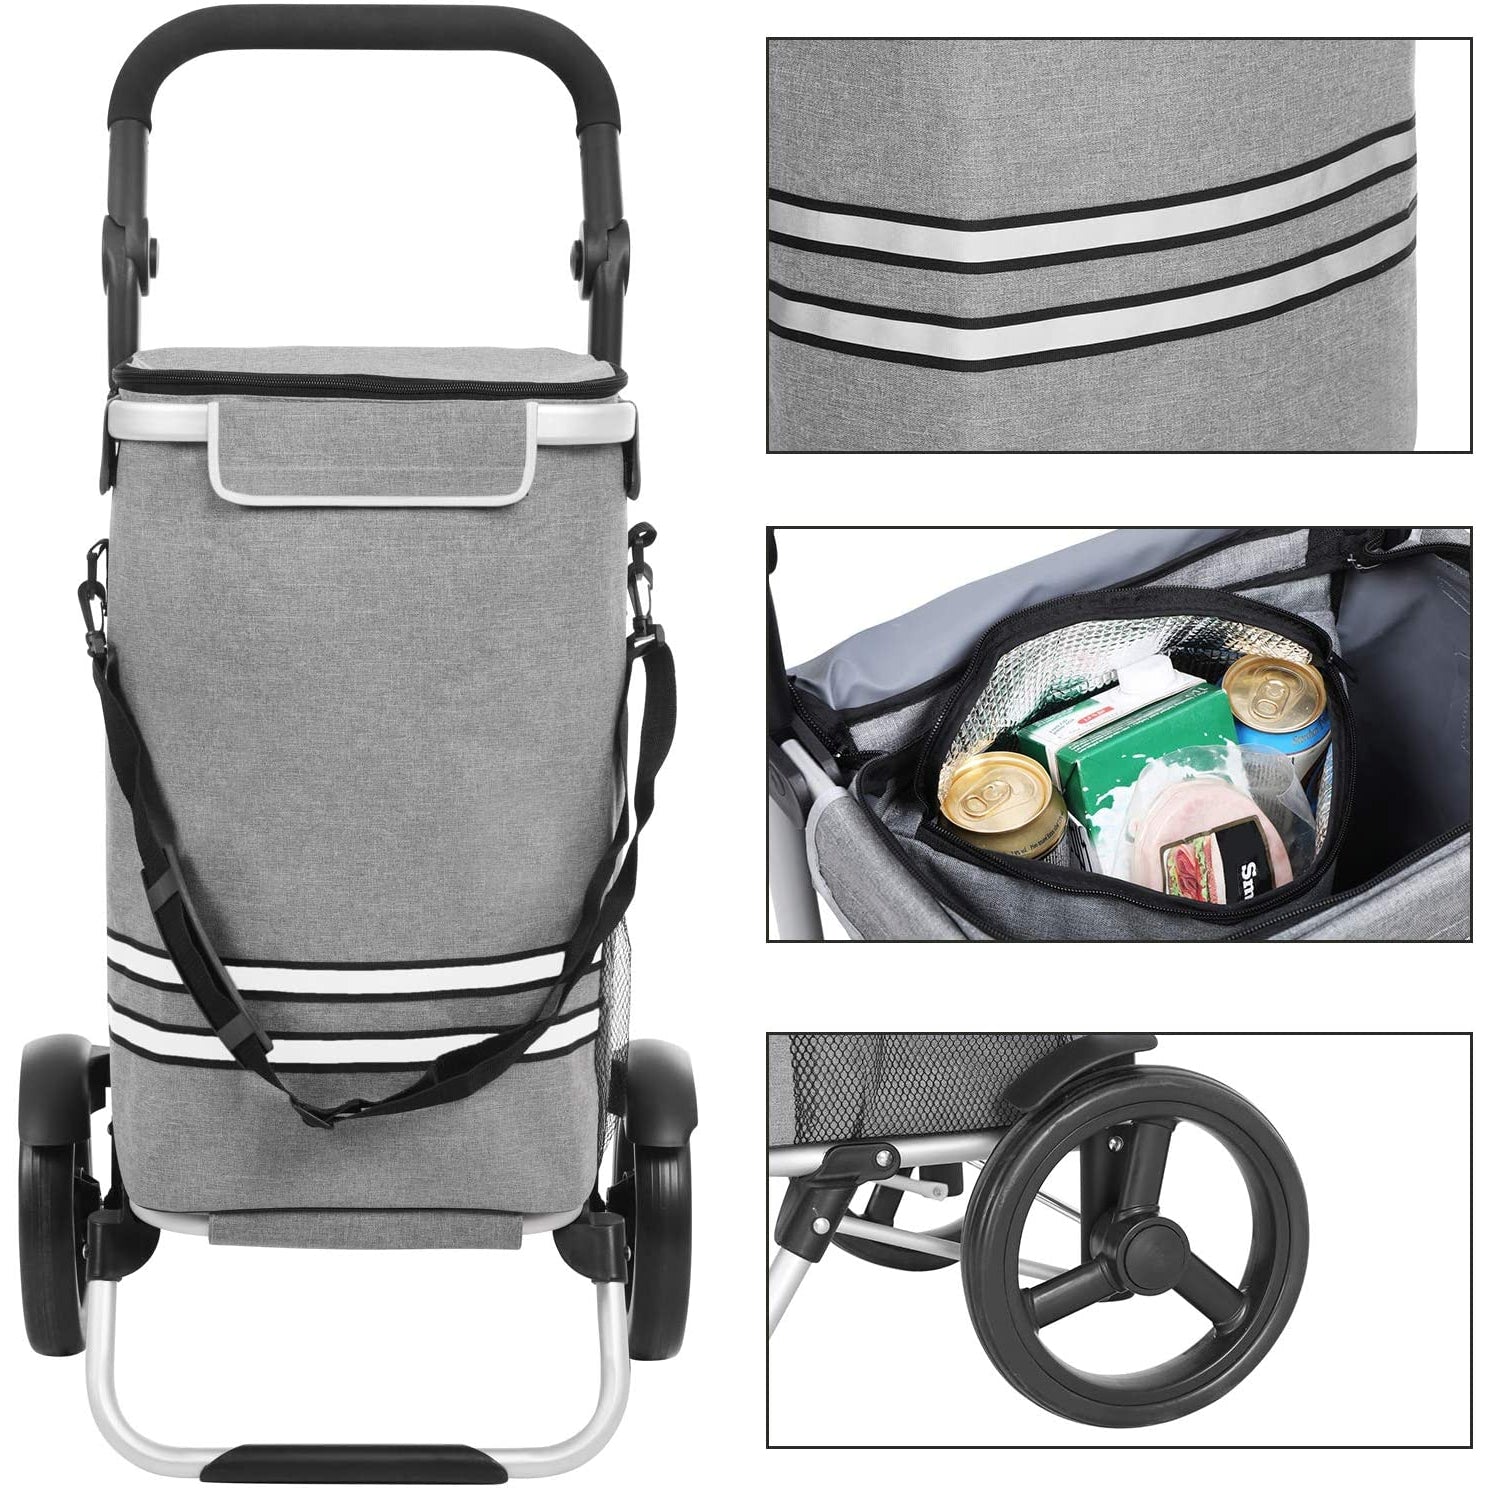 Nancy's Shopping Trolley - Sturdy Shopping Cart - Foldable With Cooling Compartment